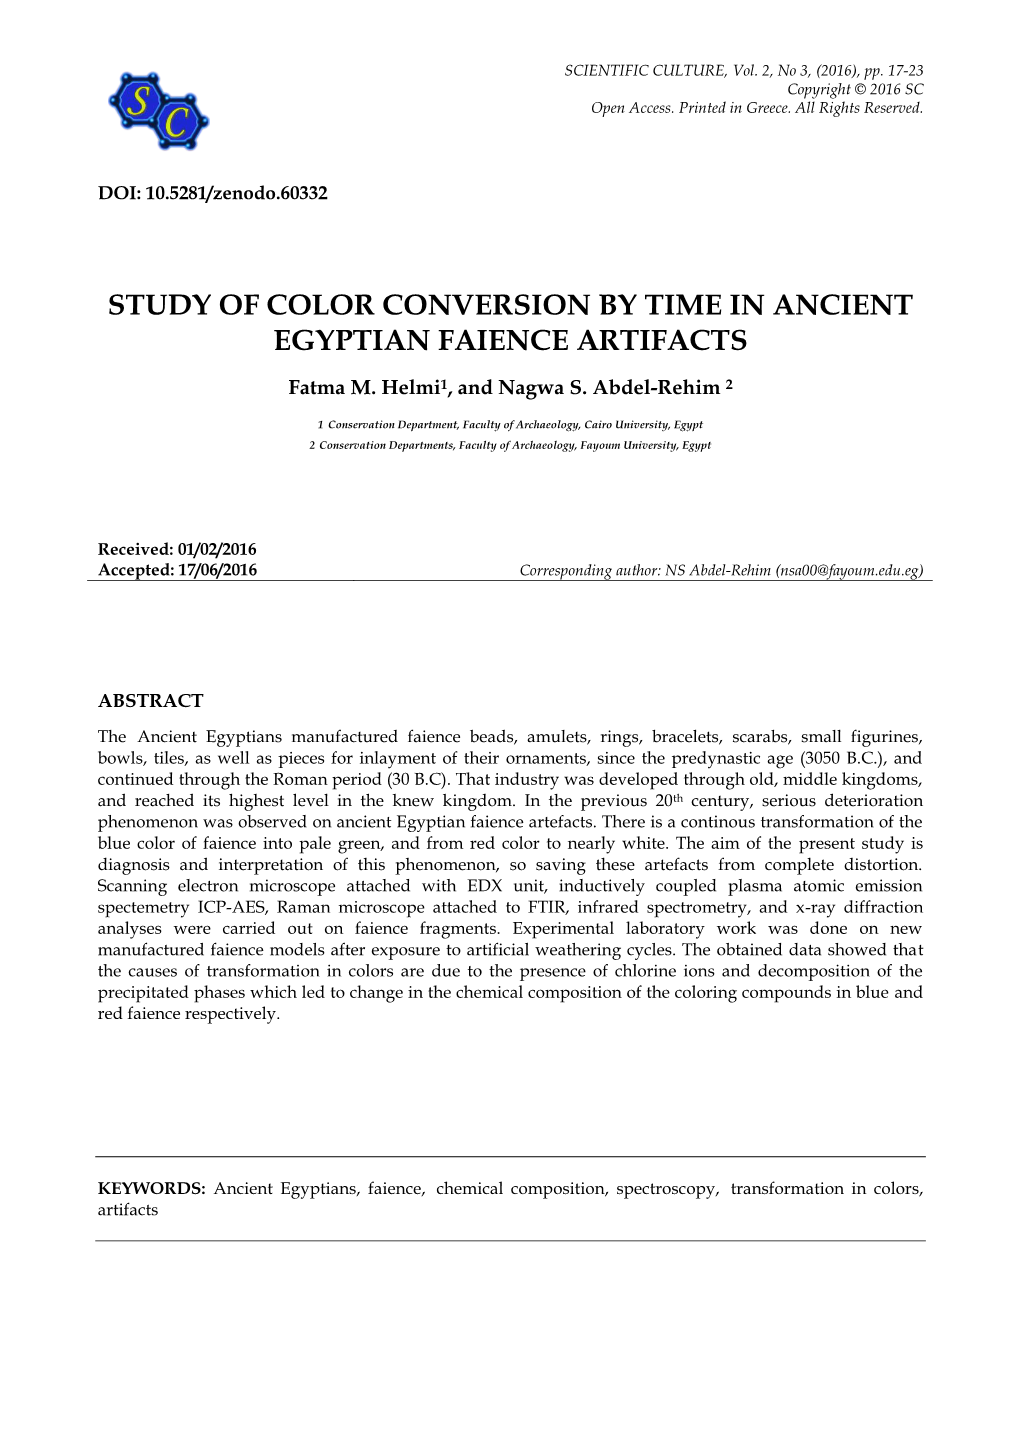 Study of Color Conversion by Time in Ancient Egyptian Faience Artifacts